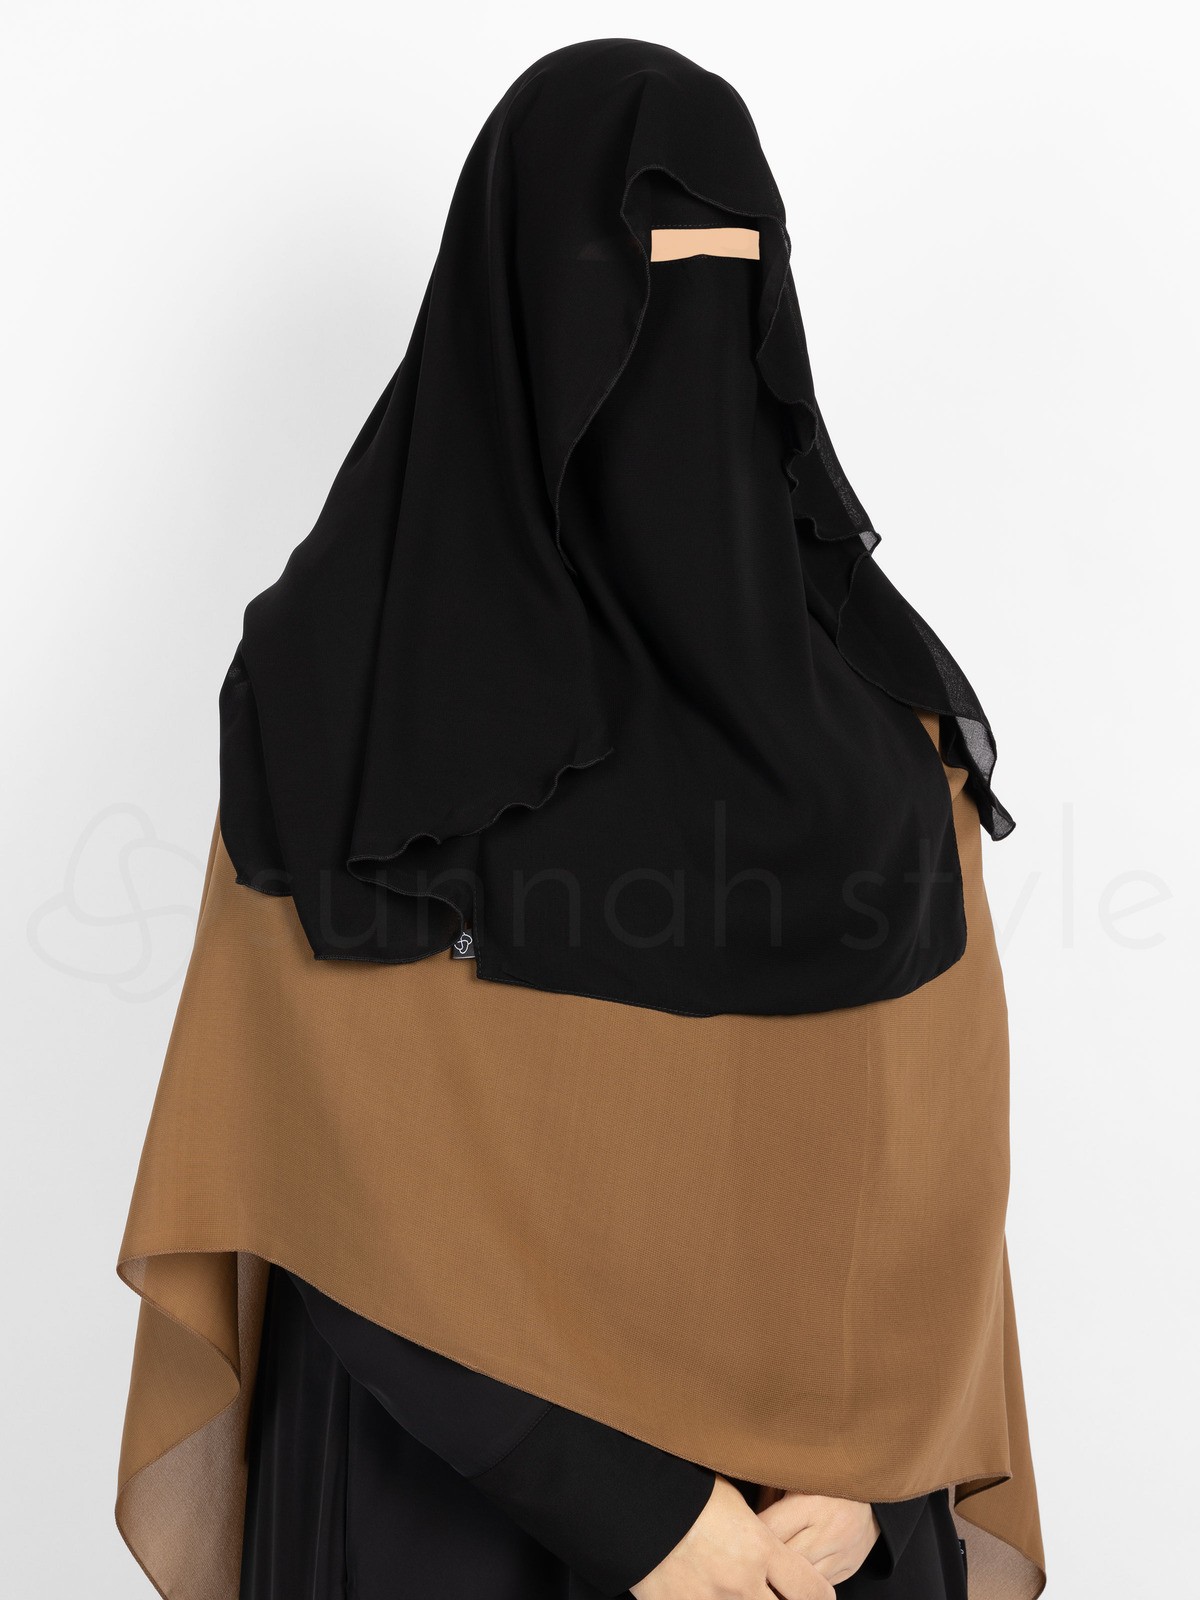 Sunnah Style - Butterfly Niqab (Black)